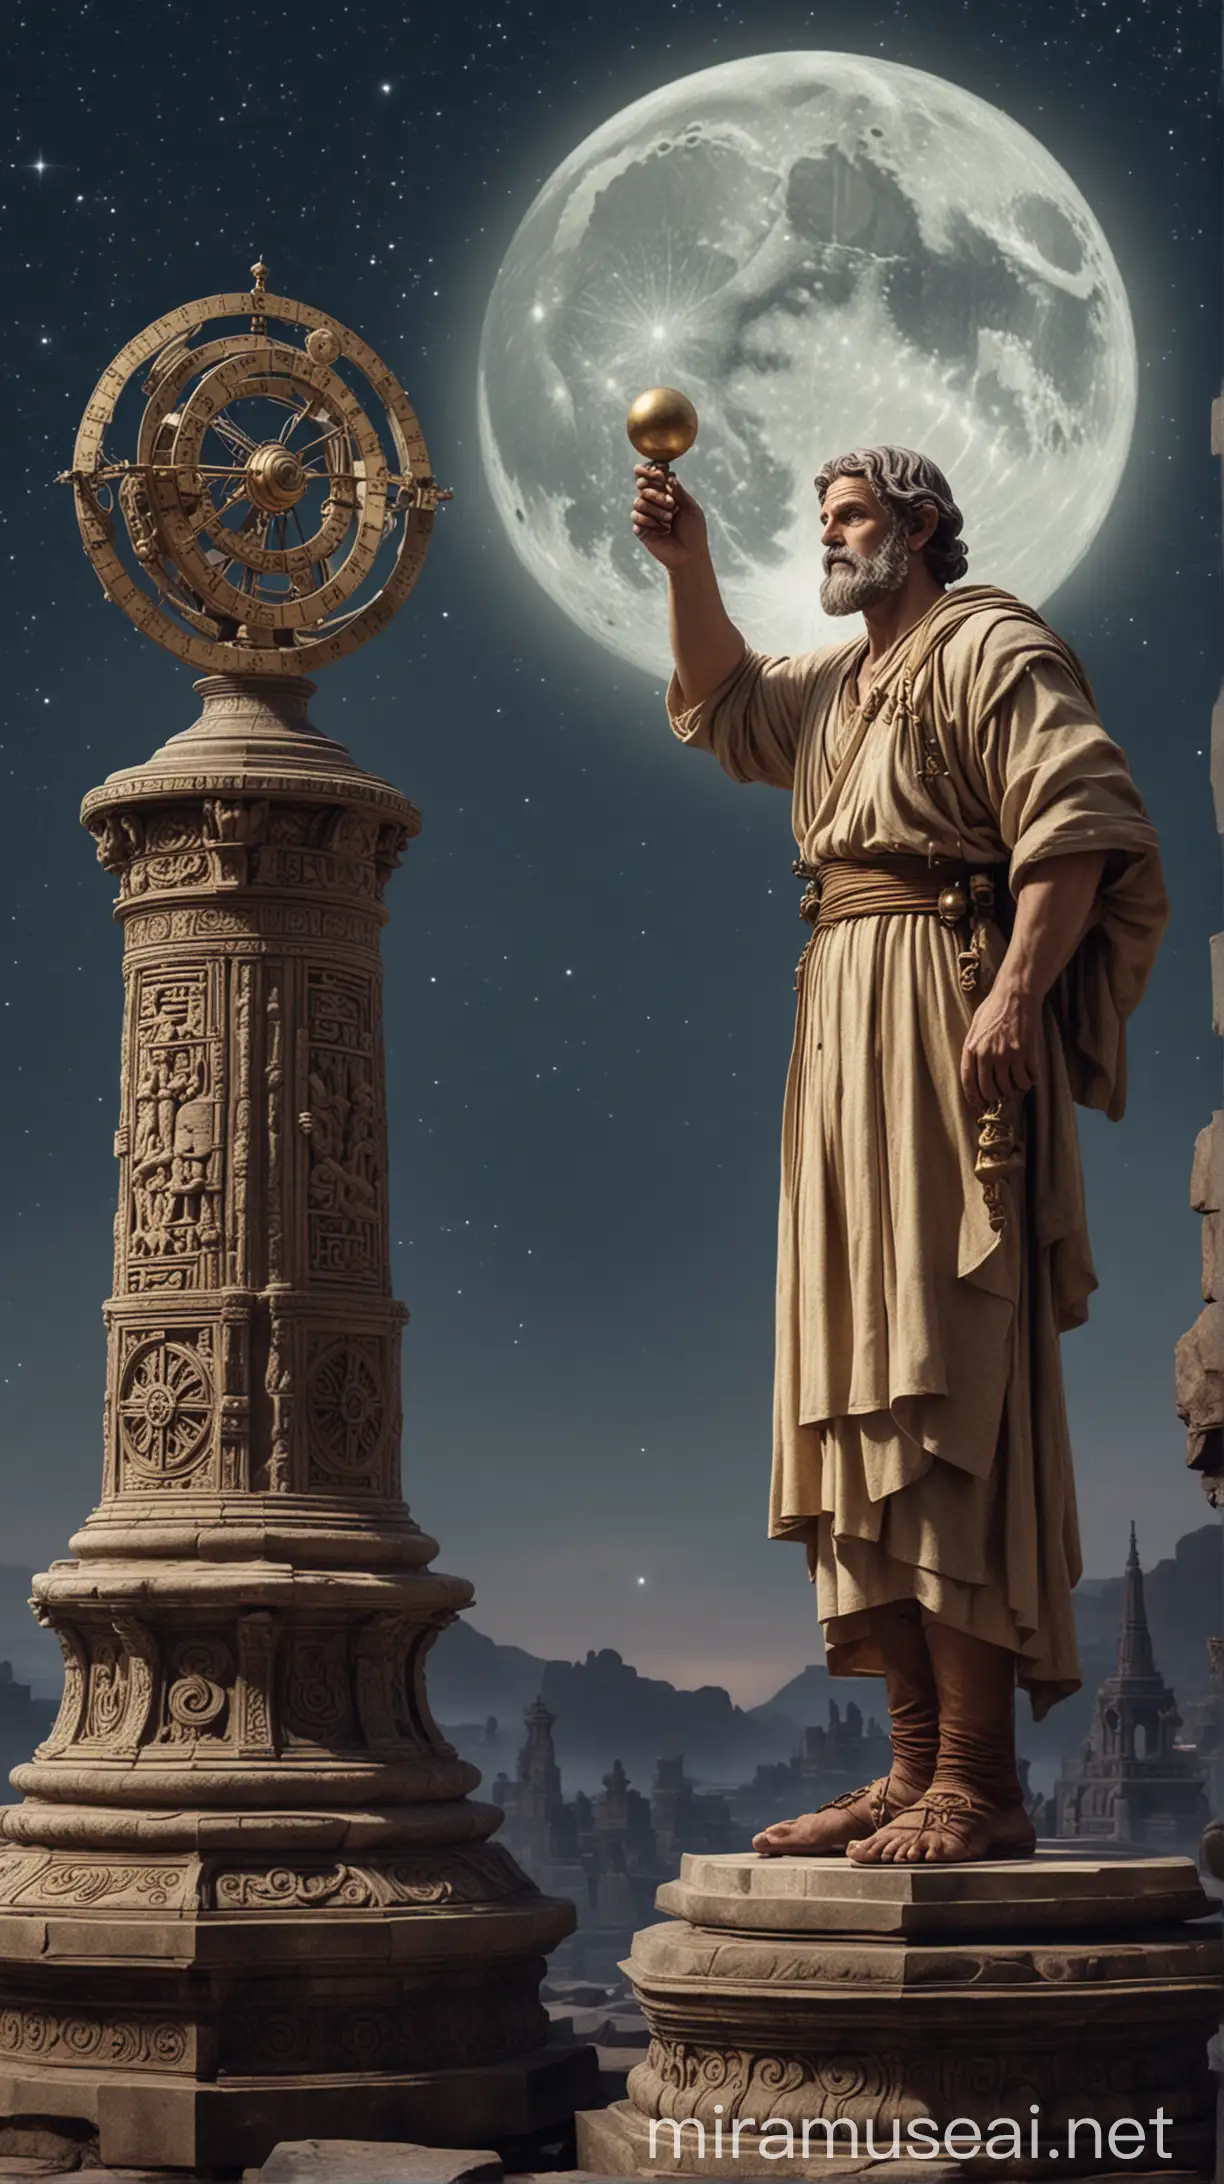 An Ancient Astronomer holding a portable astrolabe up to the night sky. He is standing atop a stone temple. Include an armillary sphere next to him.